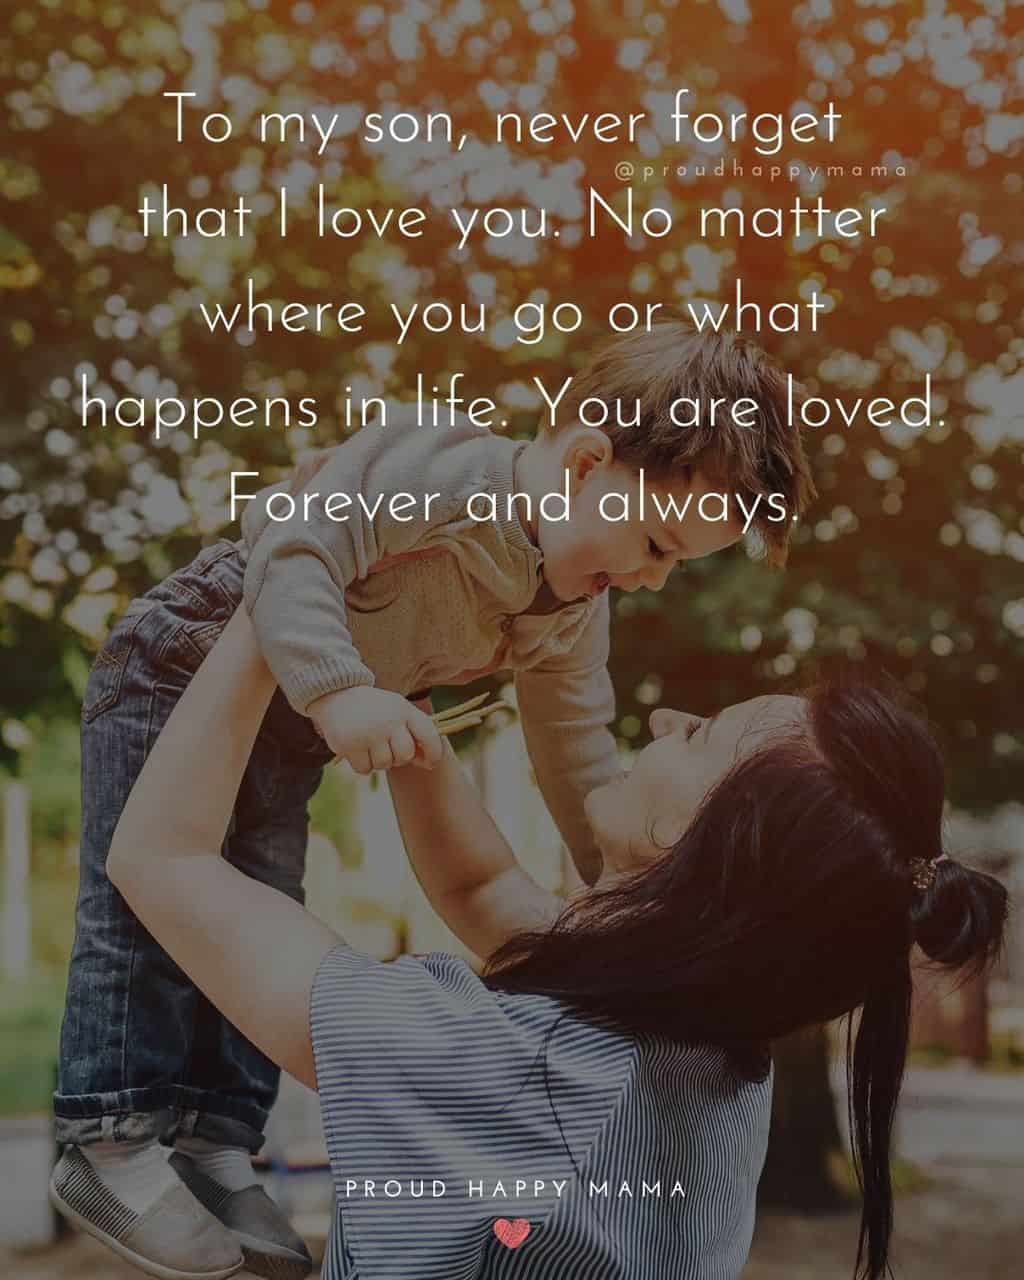 Son Quotes - To my son, never forget that I love you. No matter where you go or what happens in life. You are loved. Forever and